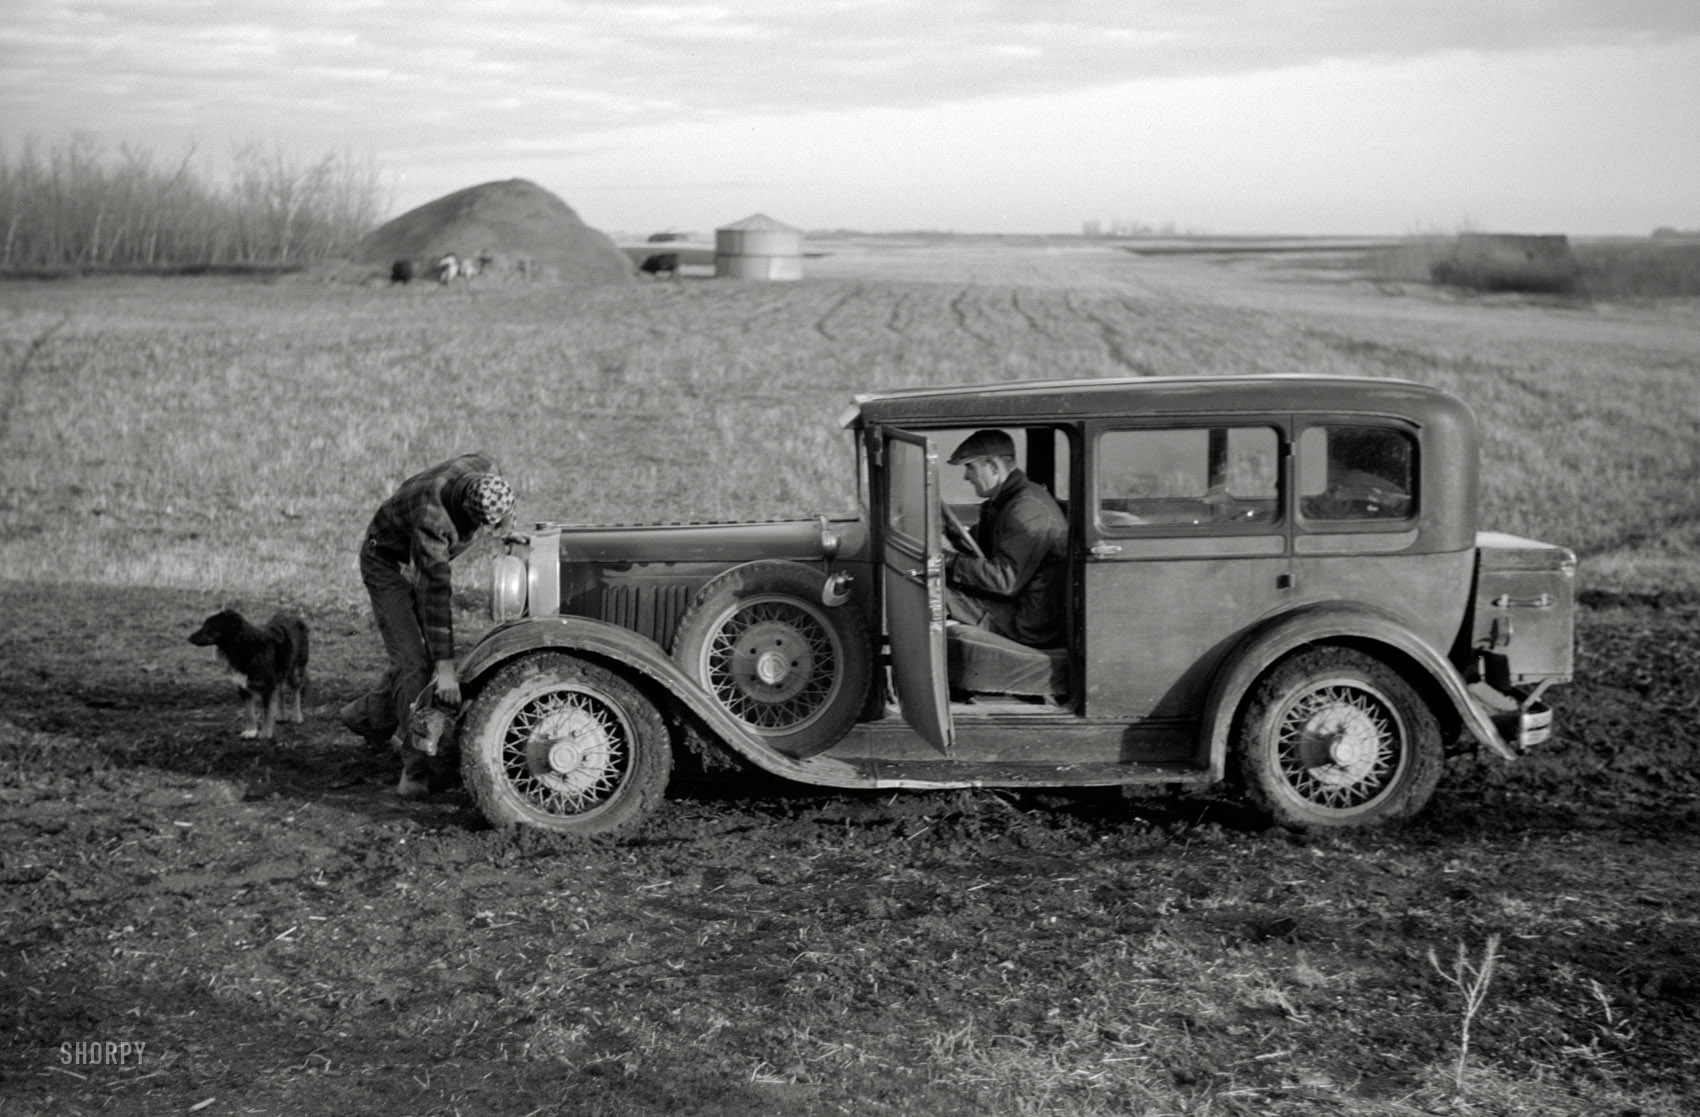 October 1940. "Oldest Sauer boy cranking family car. Cavalier County, North Dakota." 35mm nitrate negative by John Vachon. View full size.